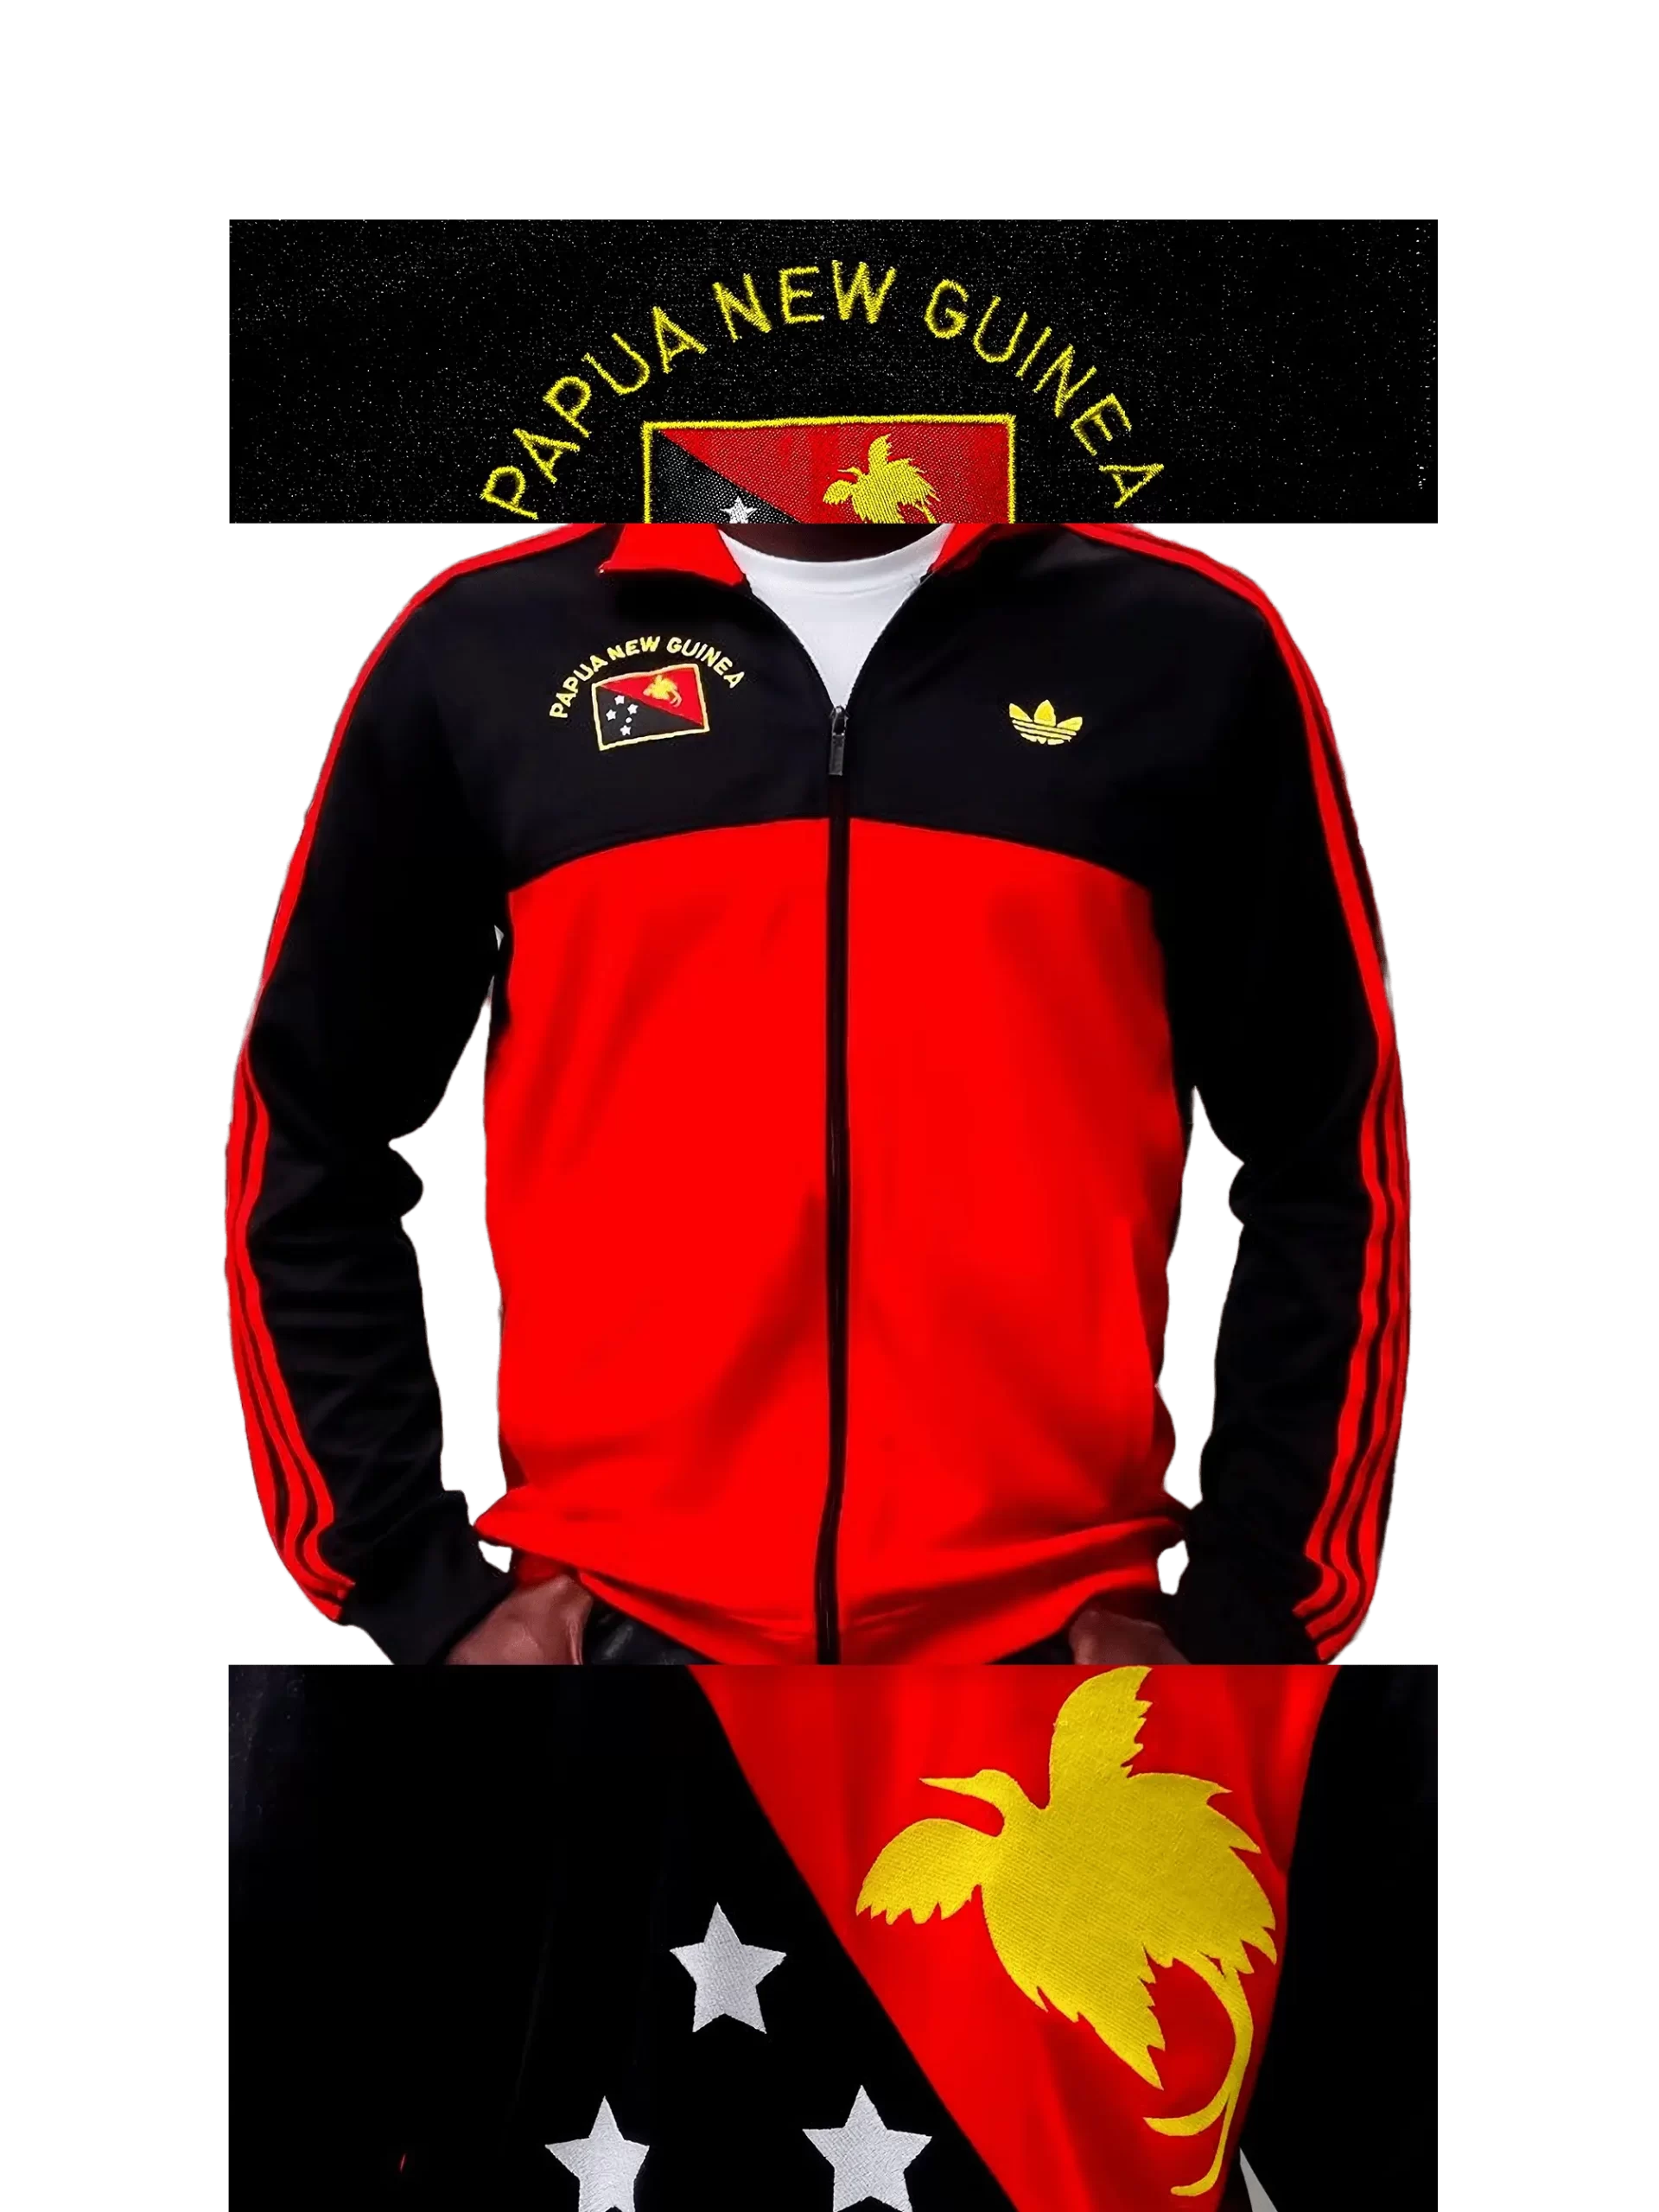 Men's 2008 Papua New Guinea Track Top by Adidas Originals: Intriguing (EnLawded.com file #lmchk61272ip2y123339kg9st)